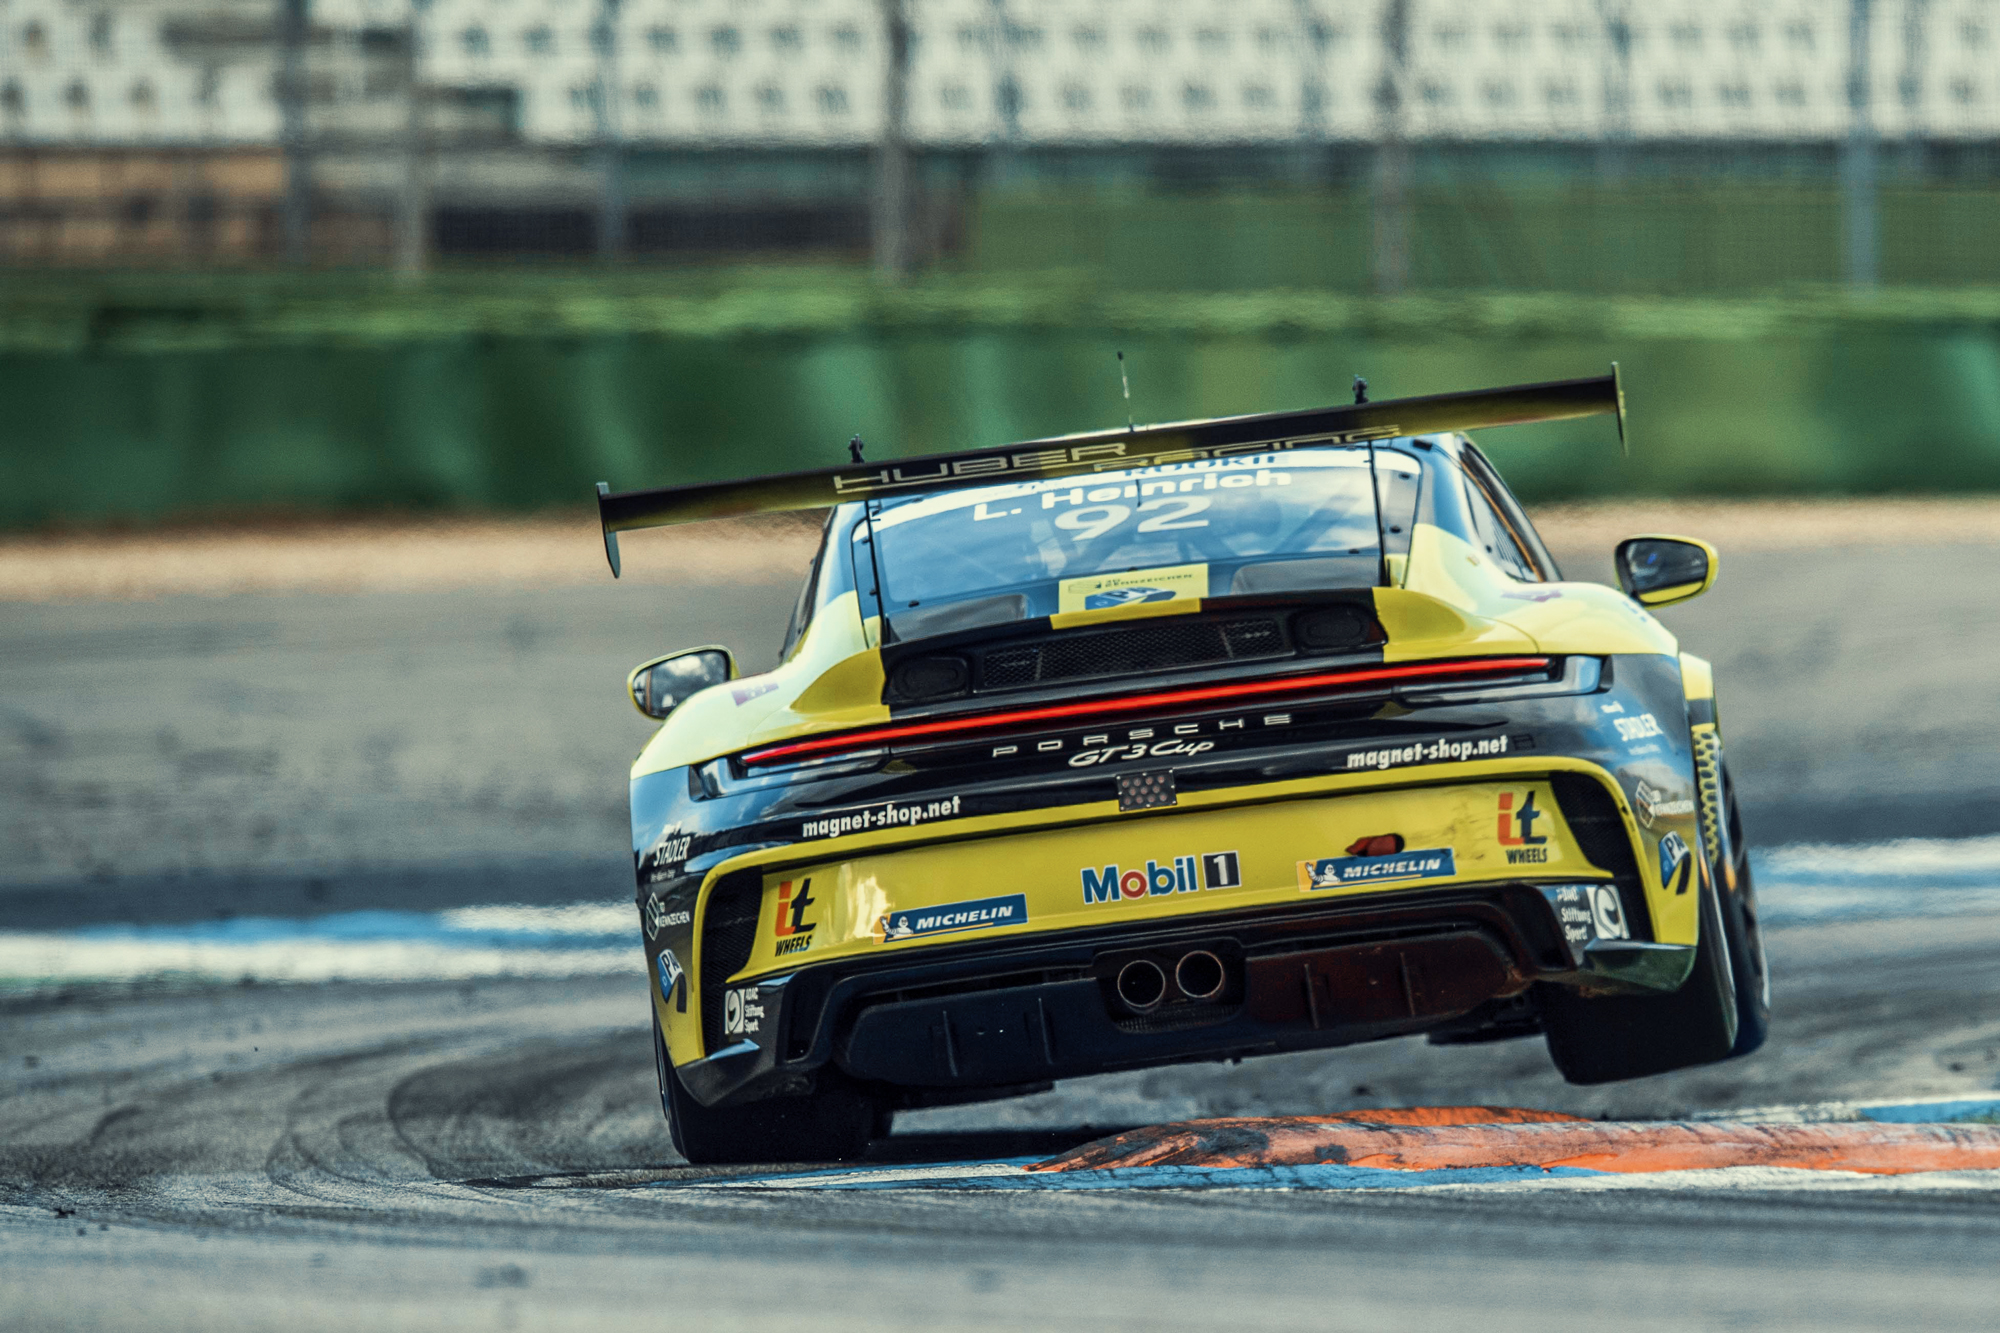 Rear of a Porsche GT3 Cup car cornering on track